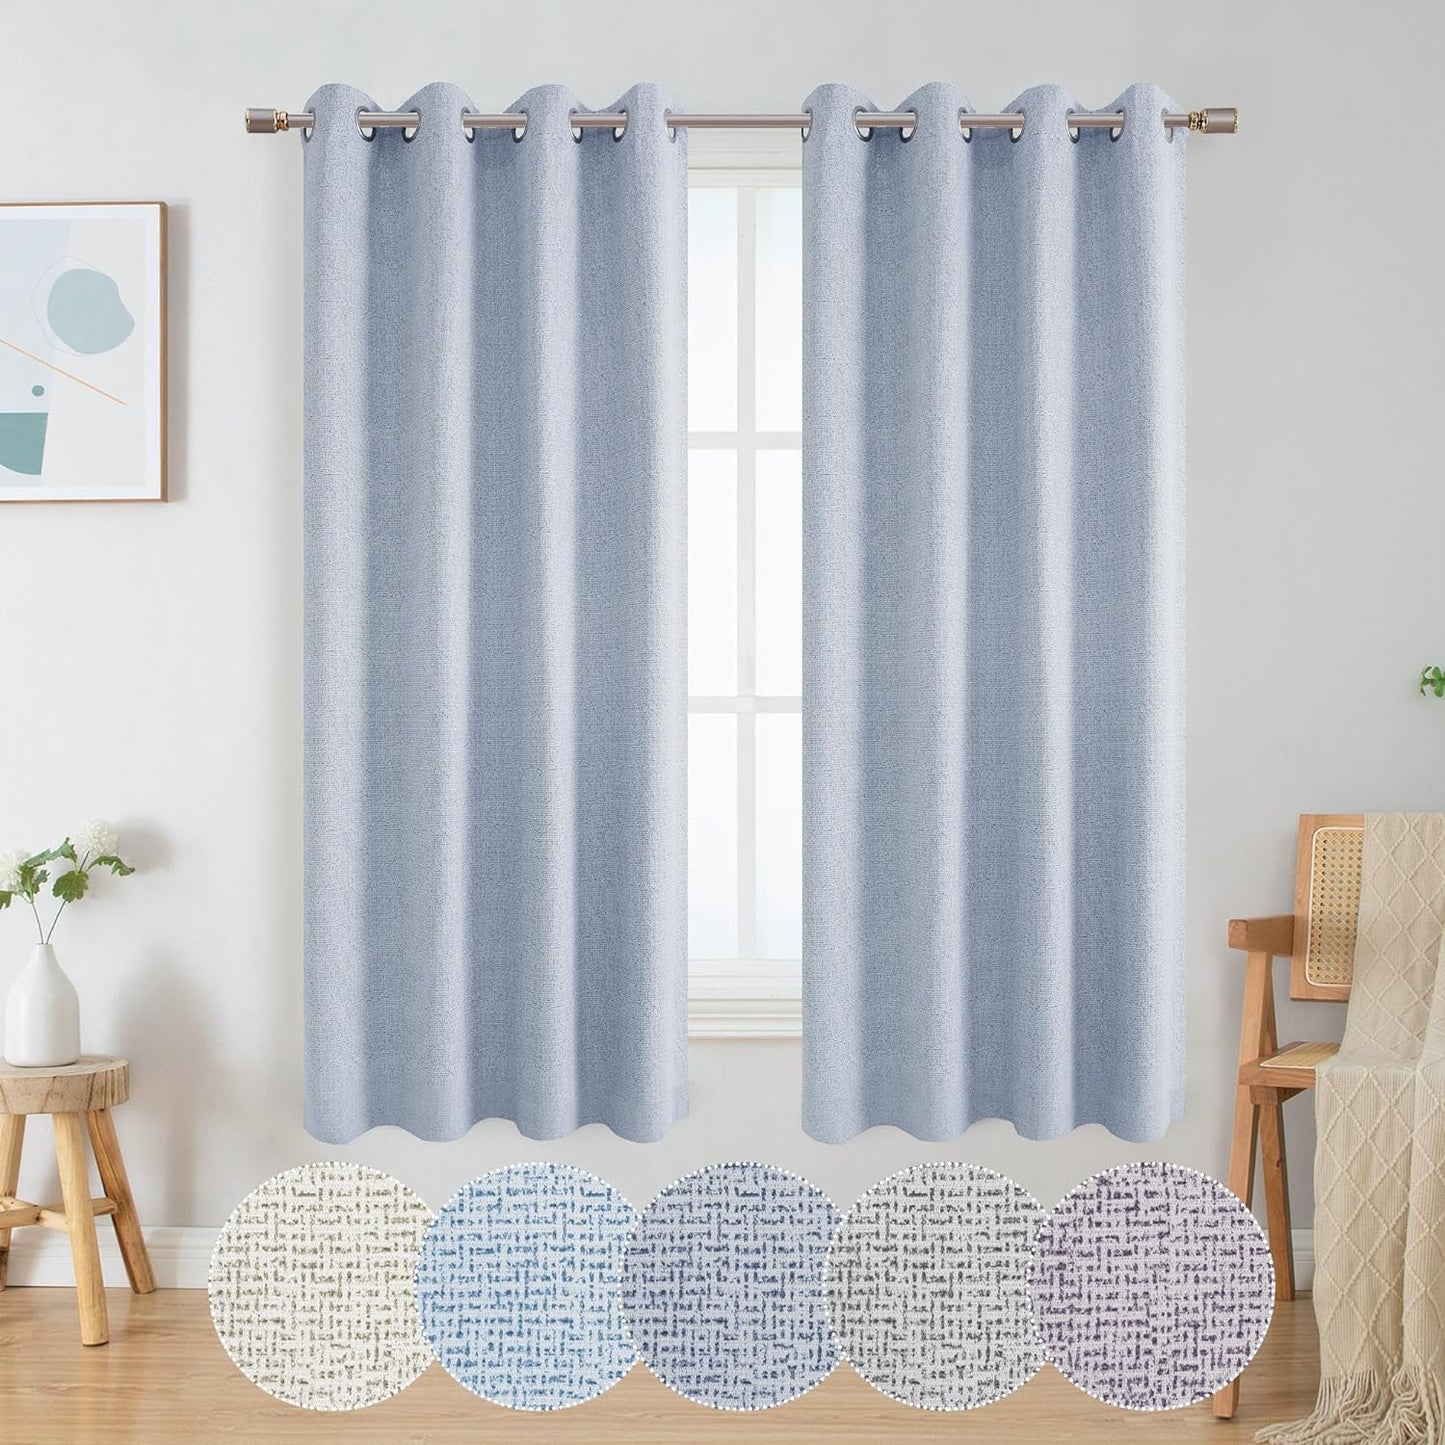 OWENIE Luke Black Out Curtains 63 Inch Long 2 Panels for Bedroom, Geometric Printed Completely Blackout Room Darkening Curtains, Grommet Thermal Insulated Living Room Curtain, 2 PCS, Each 42Wx63L Inch  OWENIE Light Blue 42"W X 63"L | 2 Pcs 